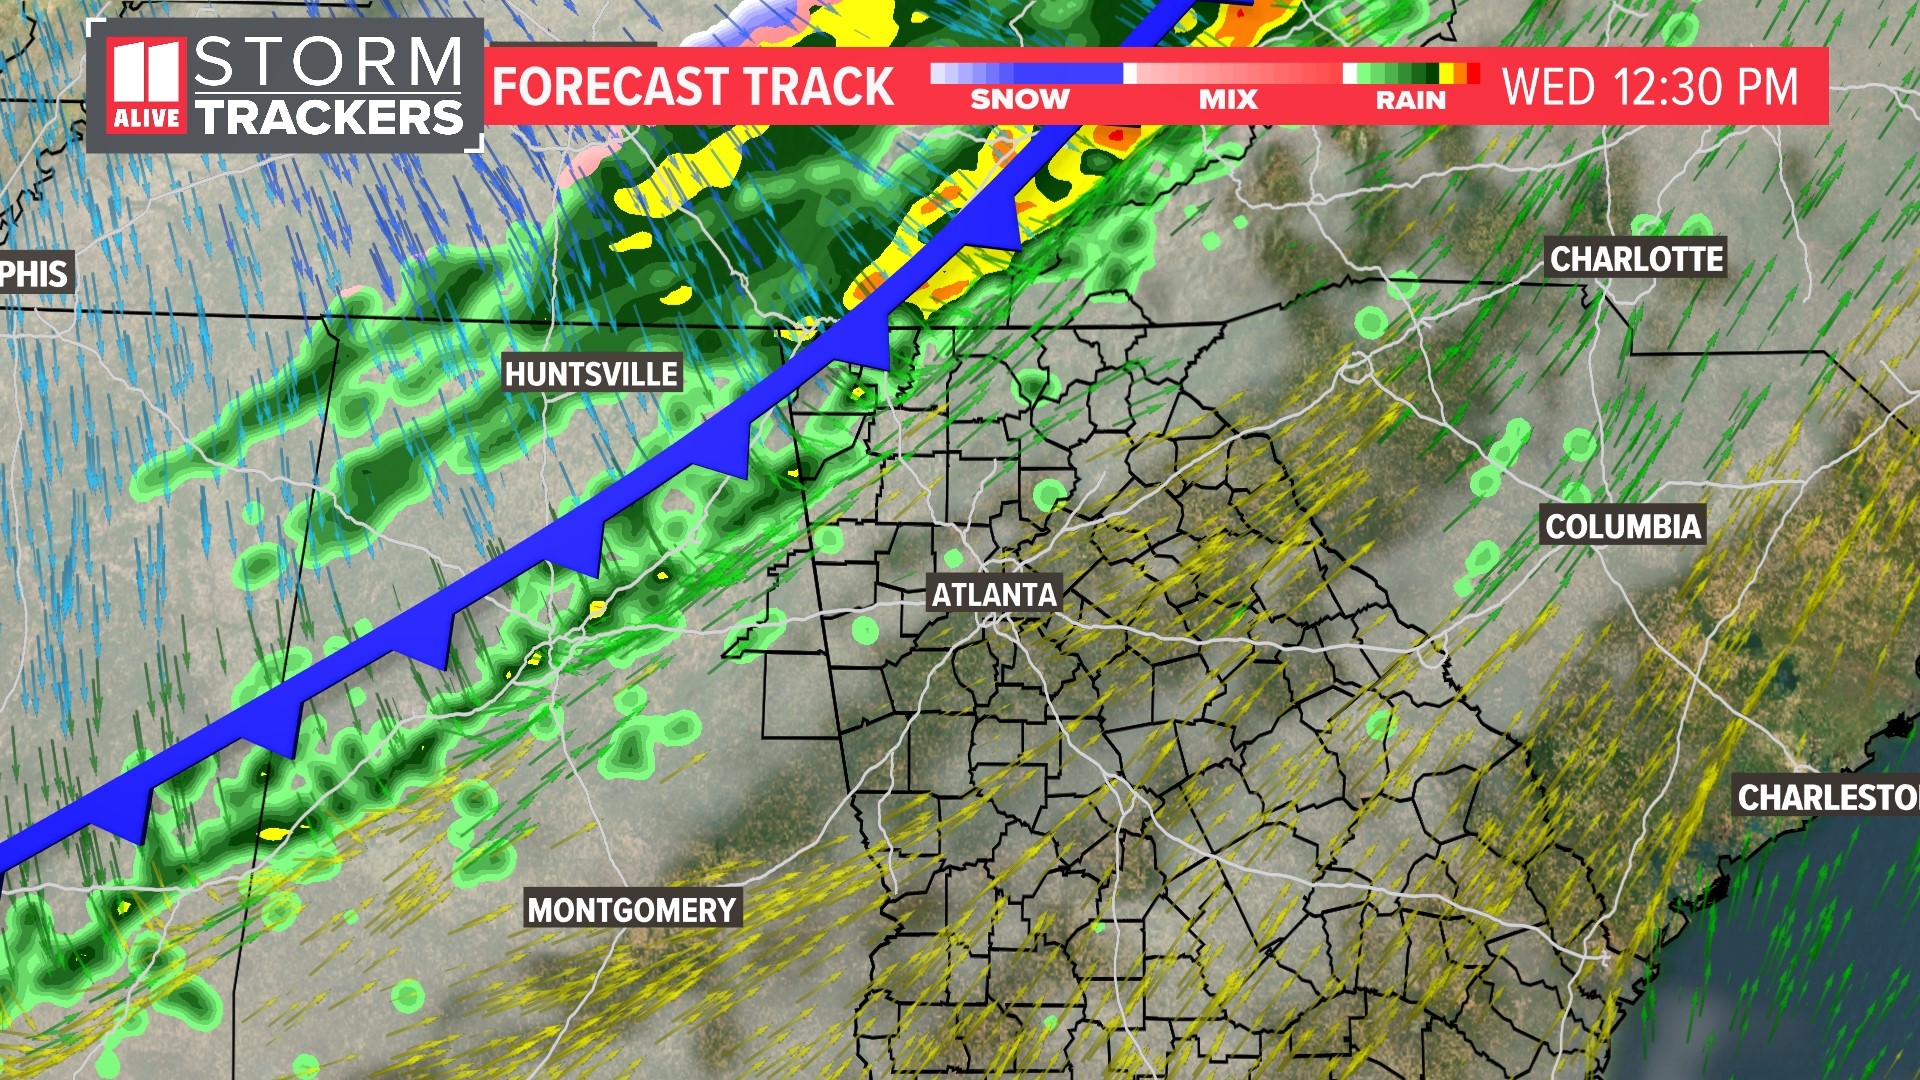 It has been a warm past few days, but a cold front moves through today and brings a few showers and storms with it.